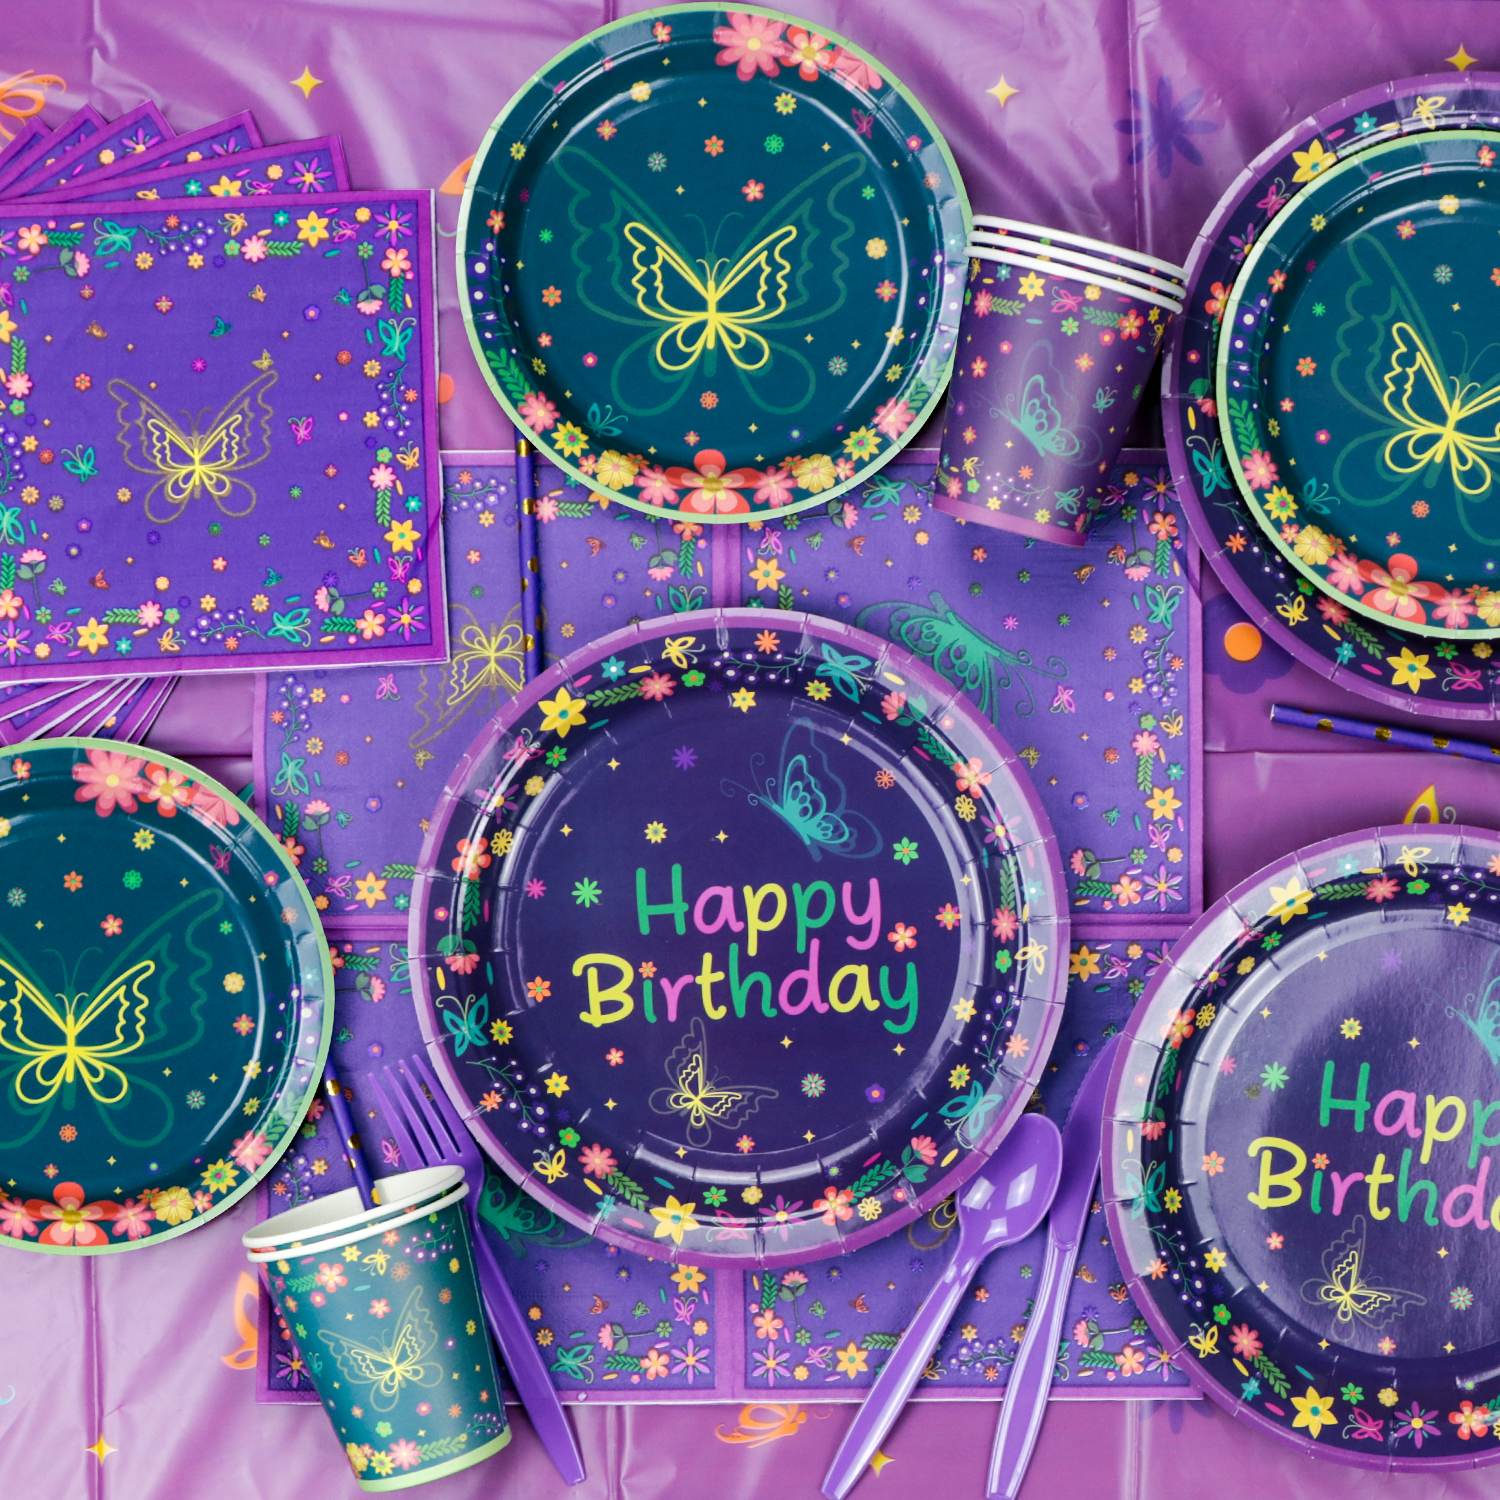 255 Pcs Movie Butterfly Birthday Decorations - Plates, Tablecloth, Balloons, Banner, Temporary Tattoos, Butterfly Stickers, Tableware, Cups, Butterfly Wing Set for Magic Party Supplies - image 4 of 8